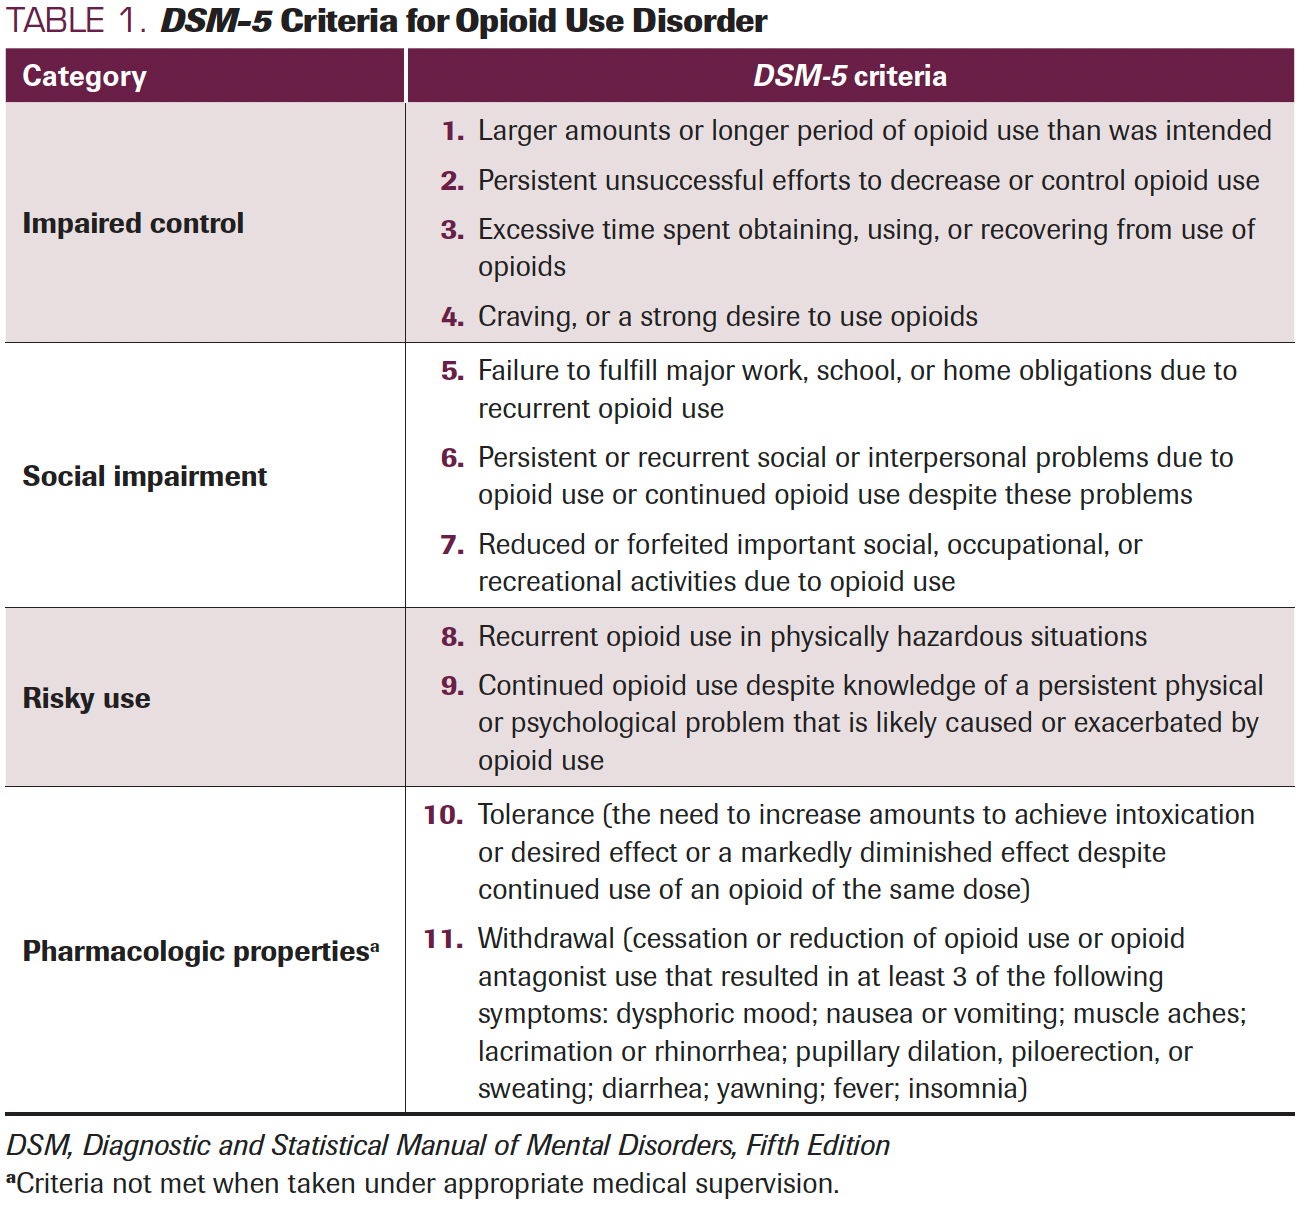 TABLE 1. DSM-5 Criteria for Opioid Use Disorder